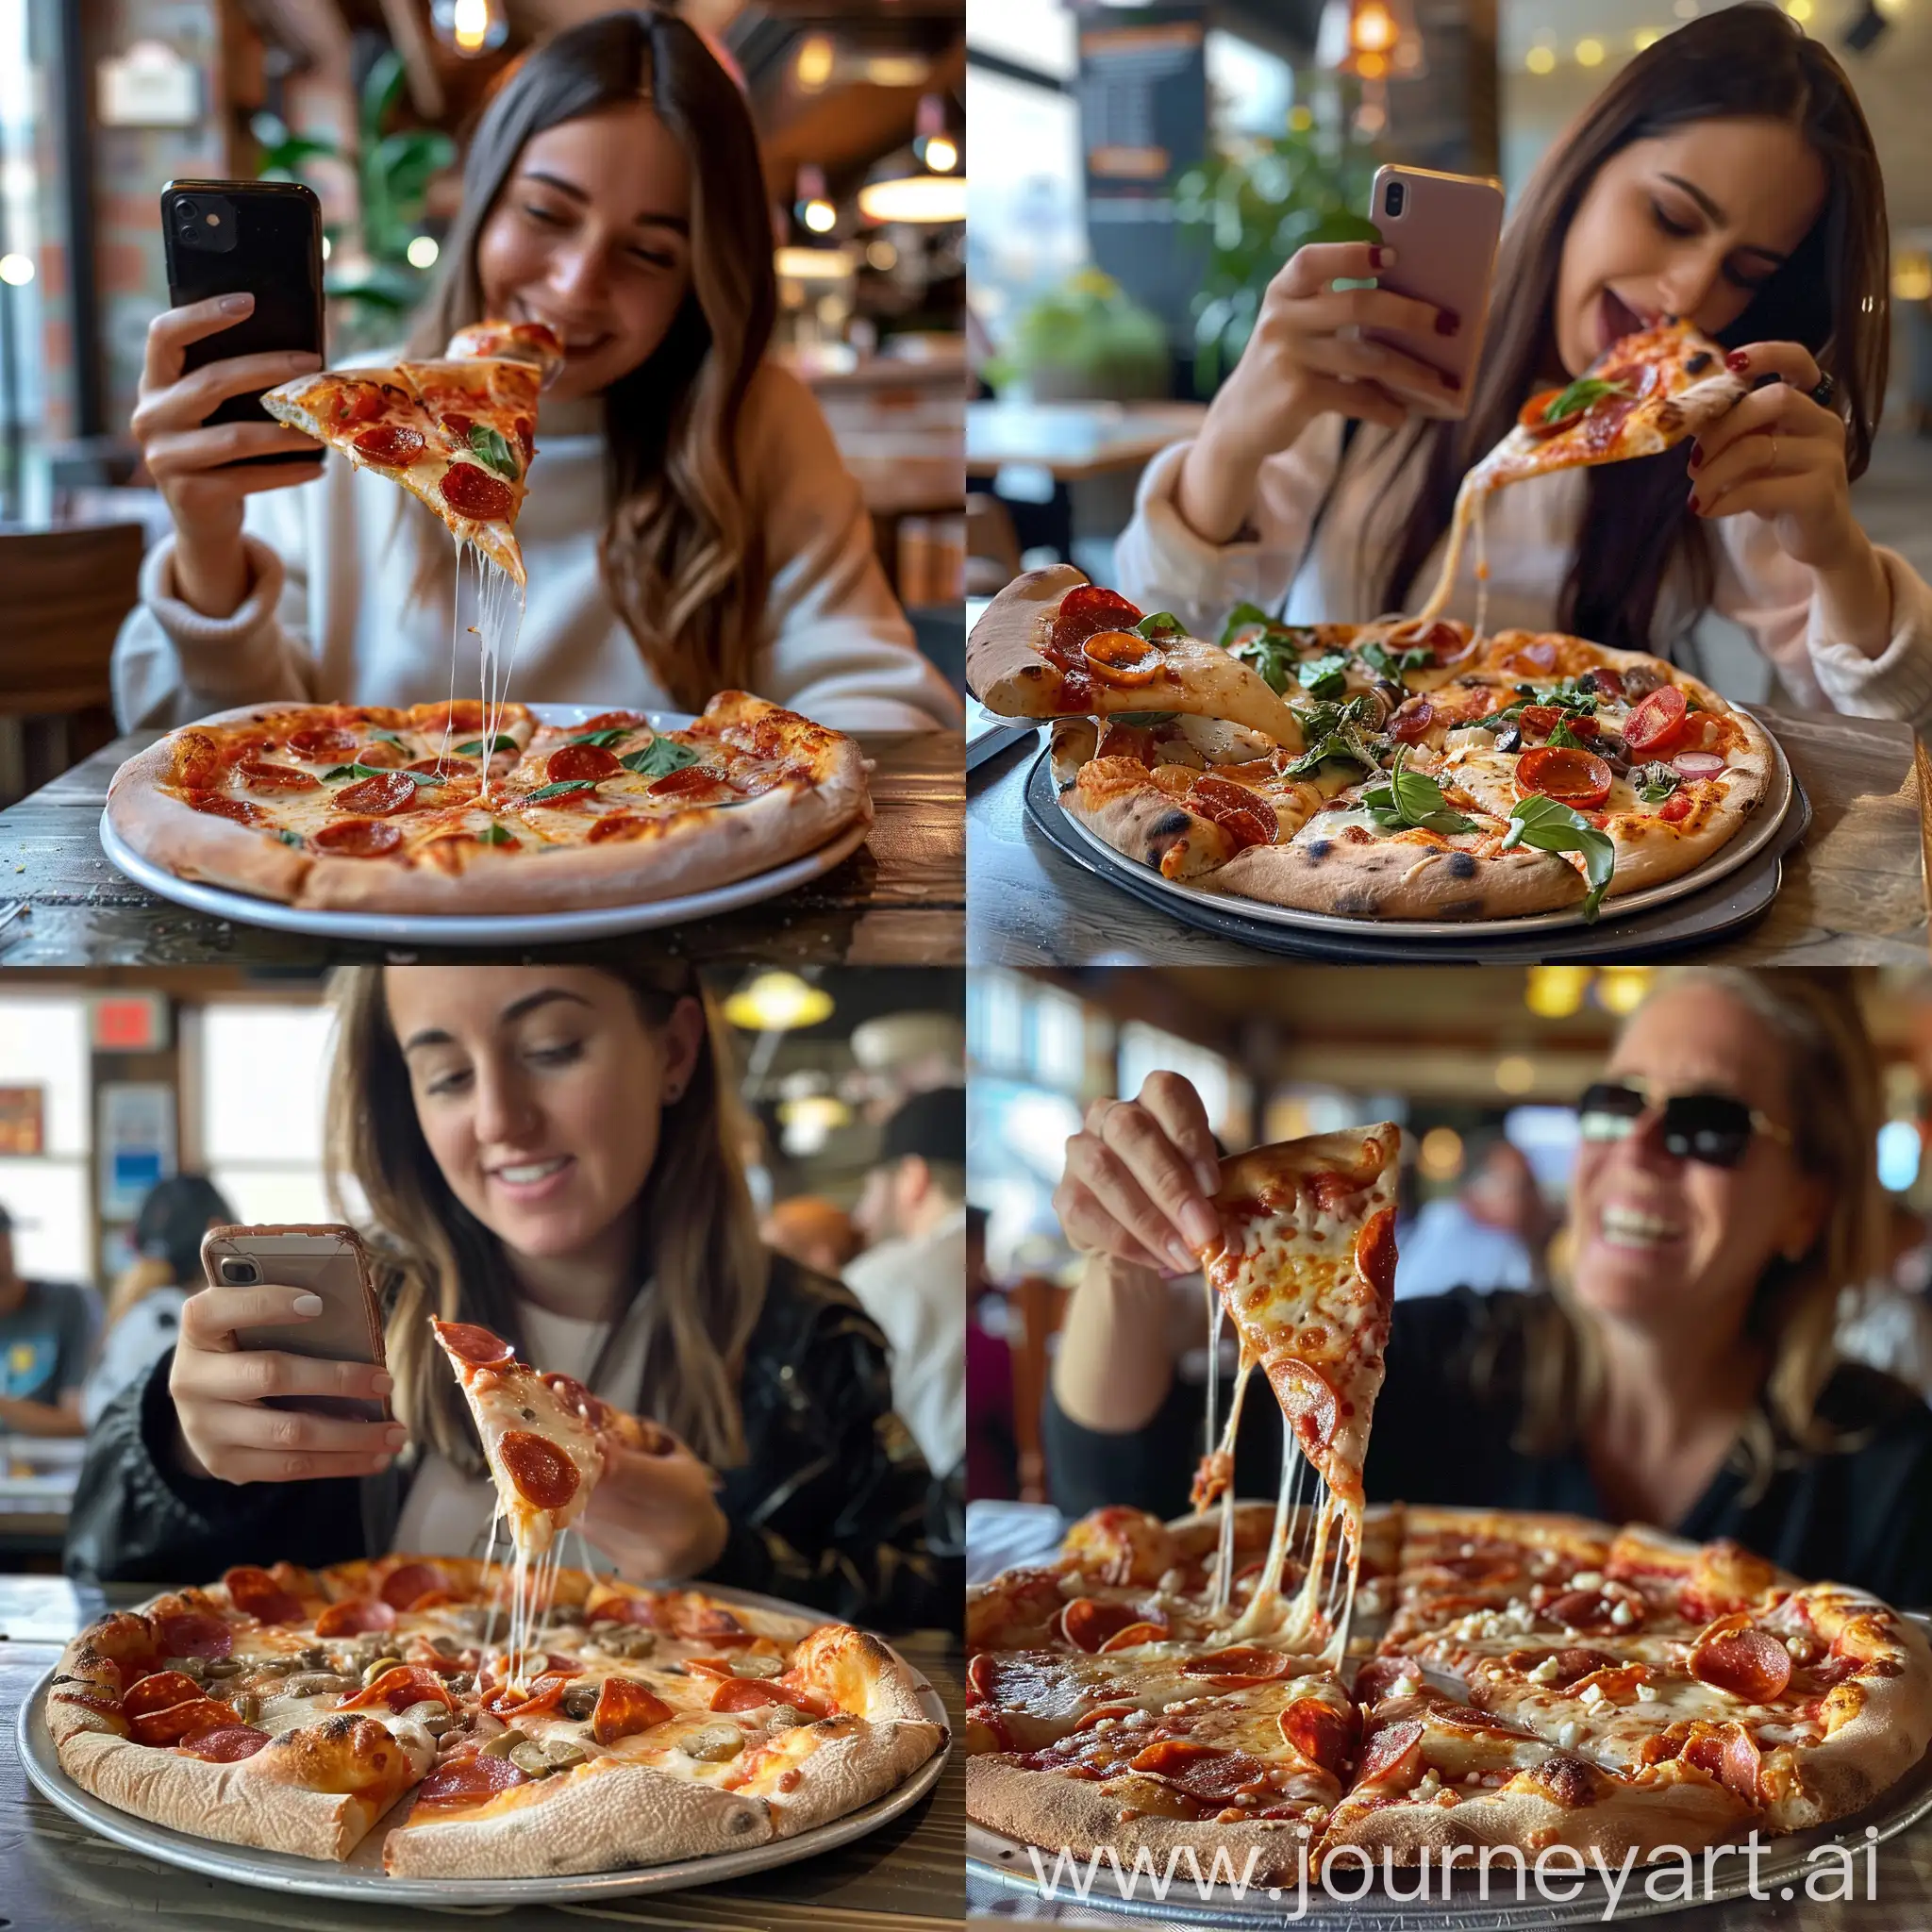 Woman-Enjoying-Pizza-at-Restaurant-Casual-Dining-Scene-Captured-on-Phone-Camera